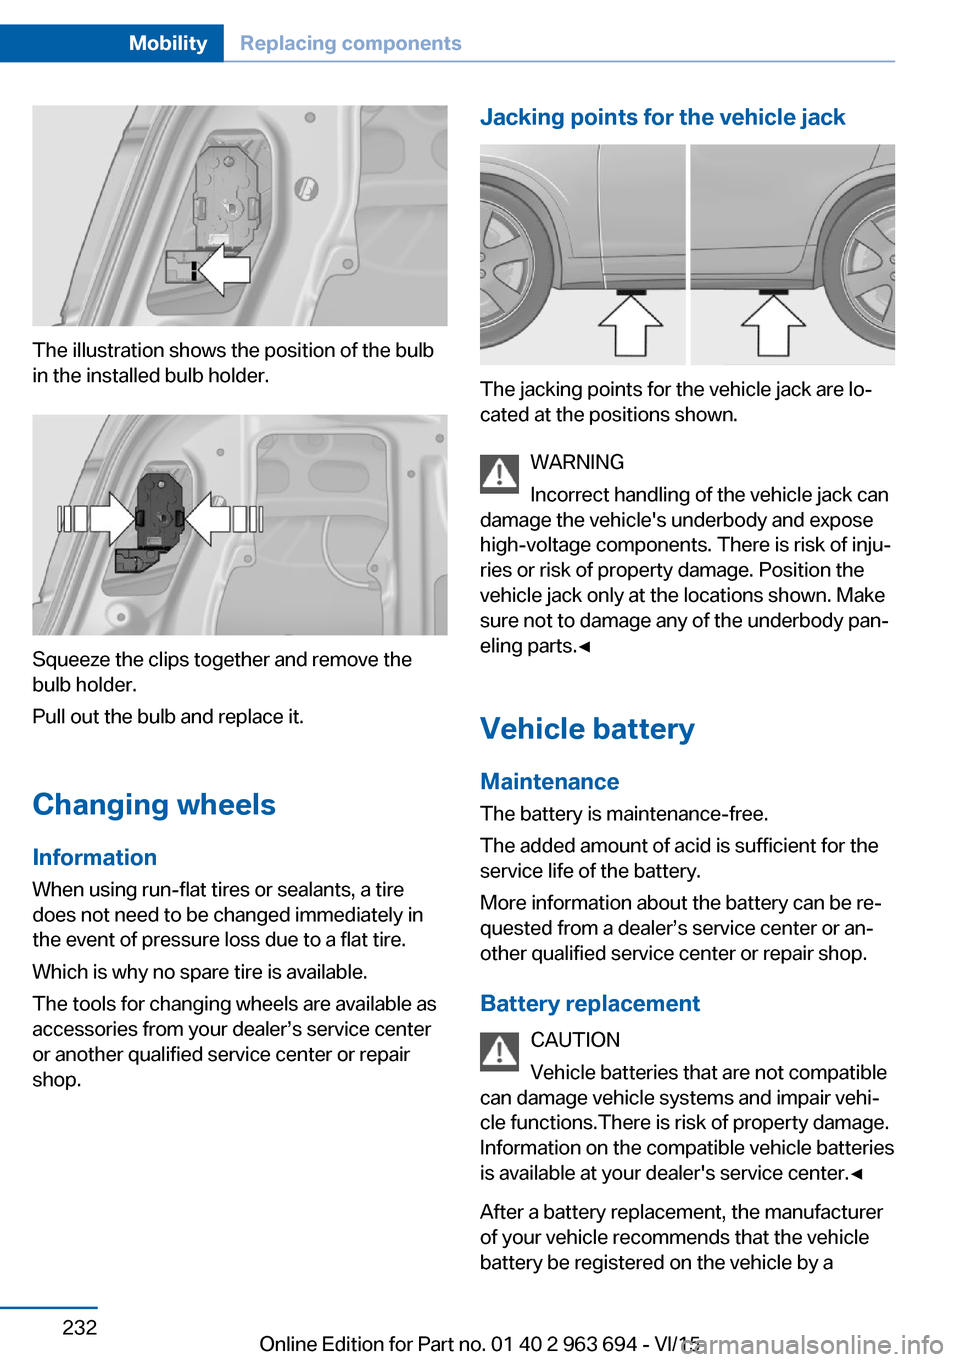 BMW ACTIVE HYBRID 5 2016 F10H Owners Manual The illustration shows the position of the bulb
in the installed bulb holder.
Squeeze the clips together and remove the
bulb holder.
Pull out the bulb and replace it.
Changing wheels Information
When 